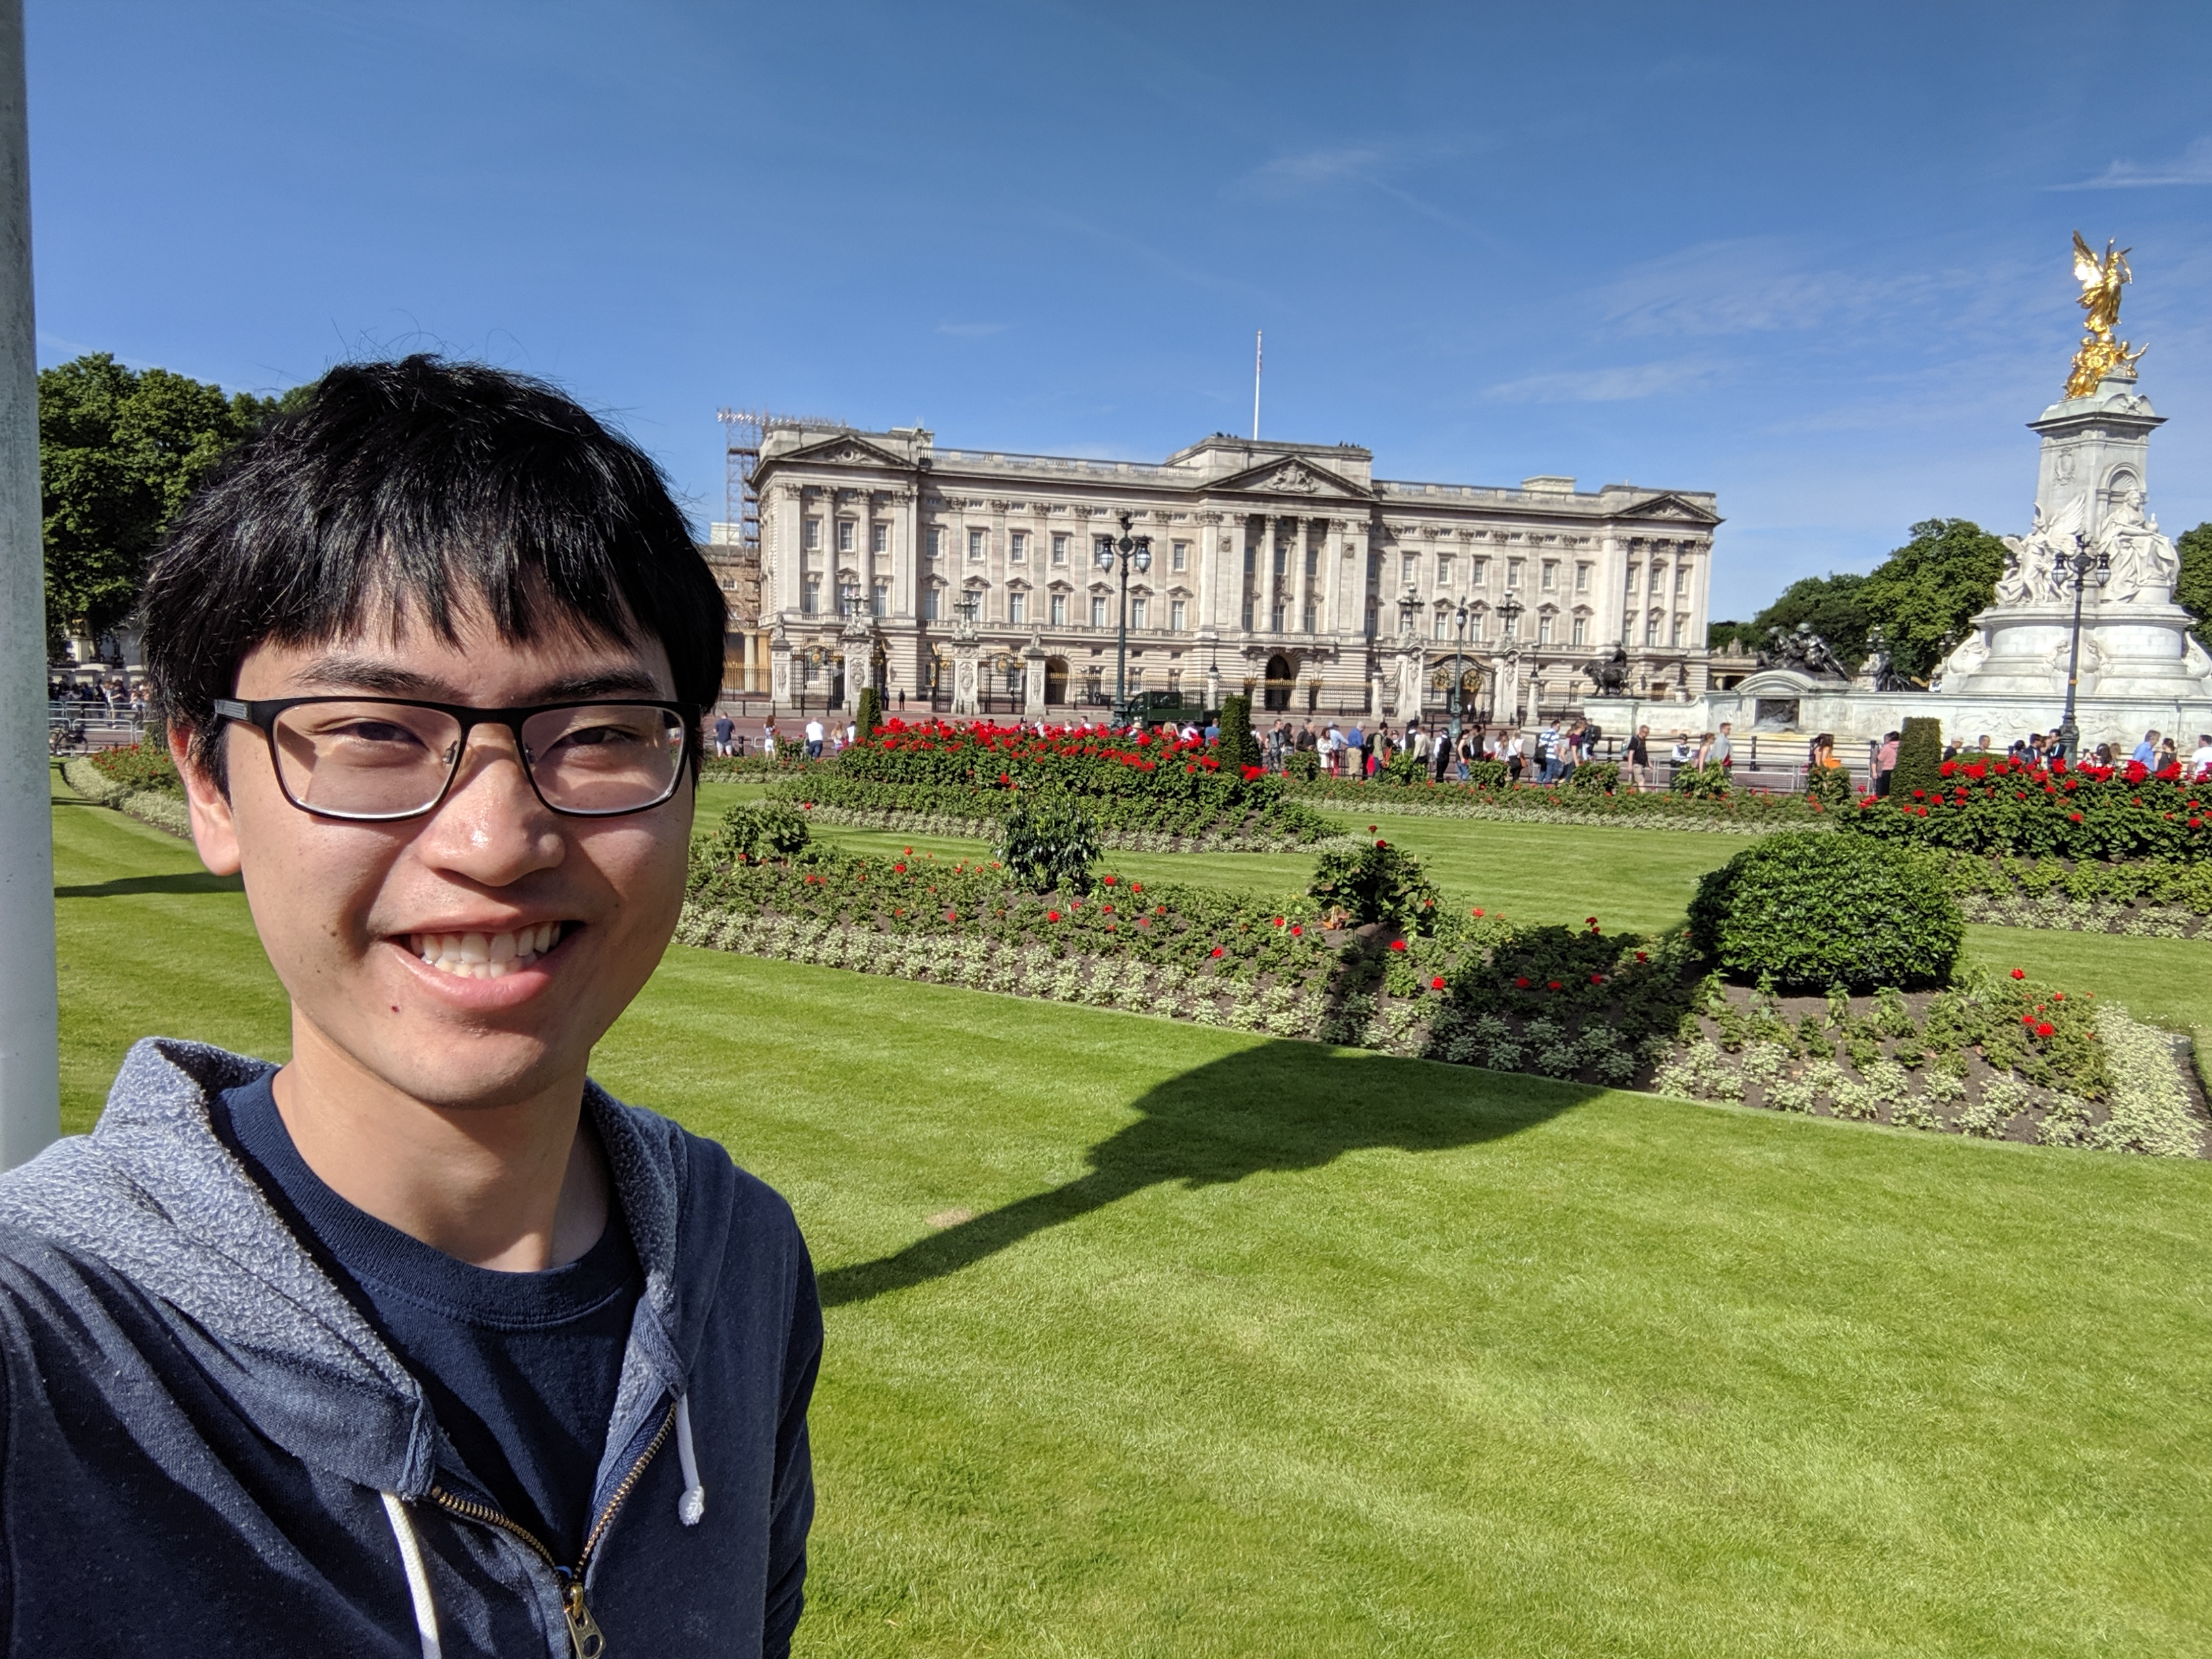 Me in front of Buckingham Palace